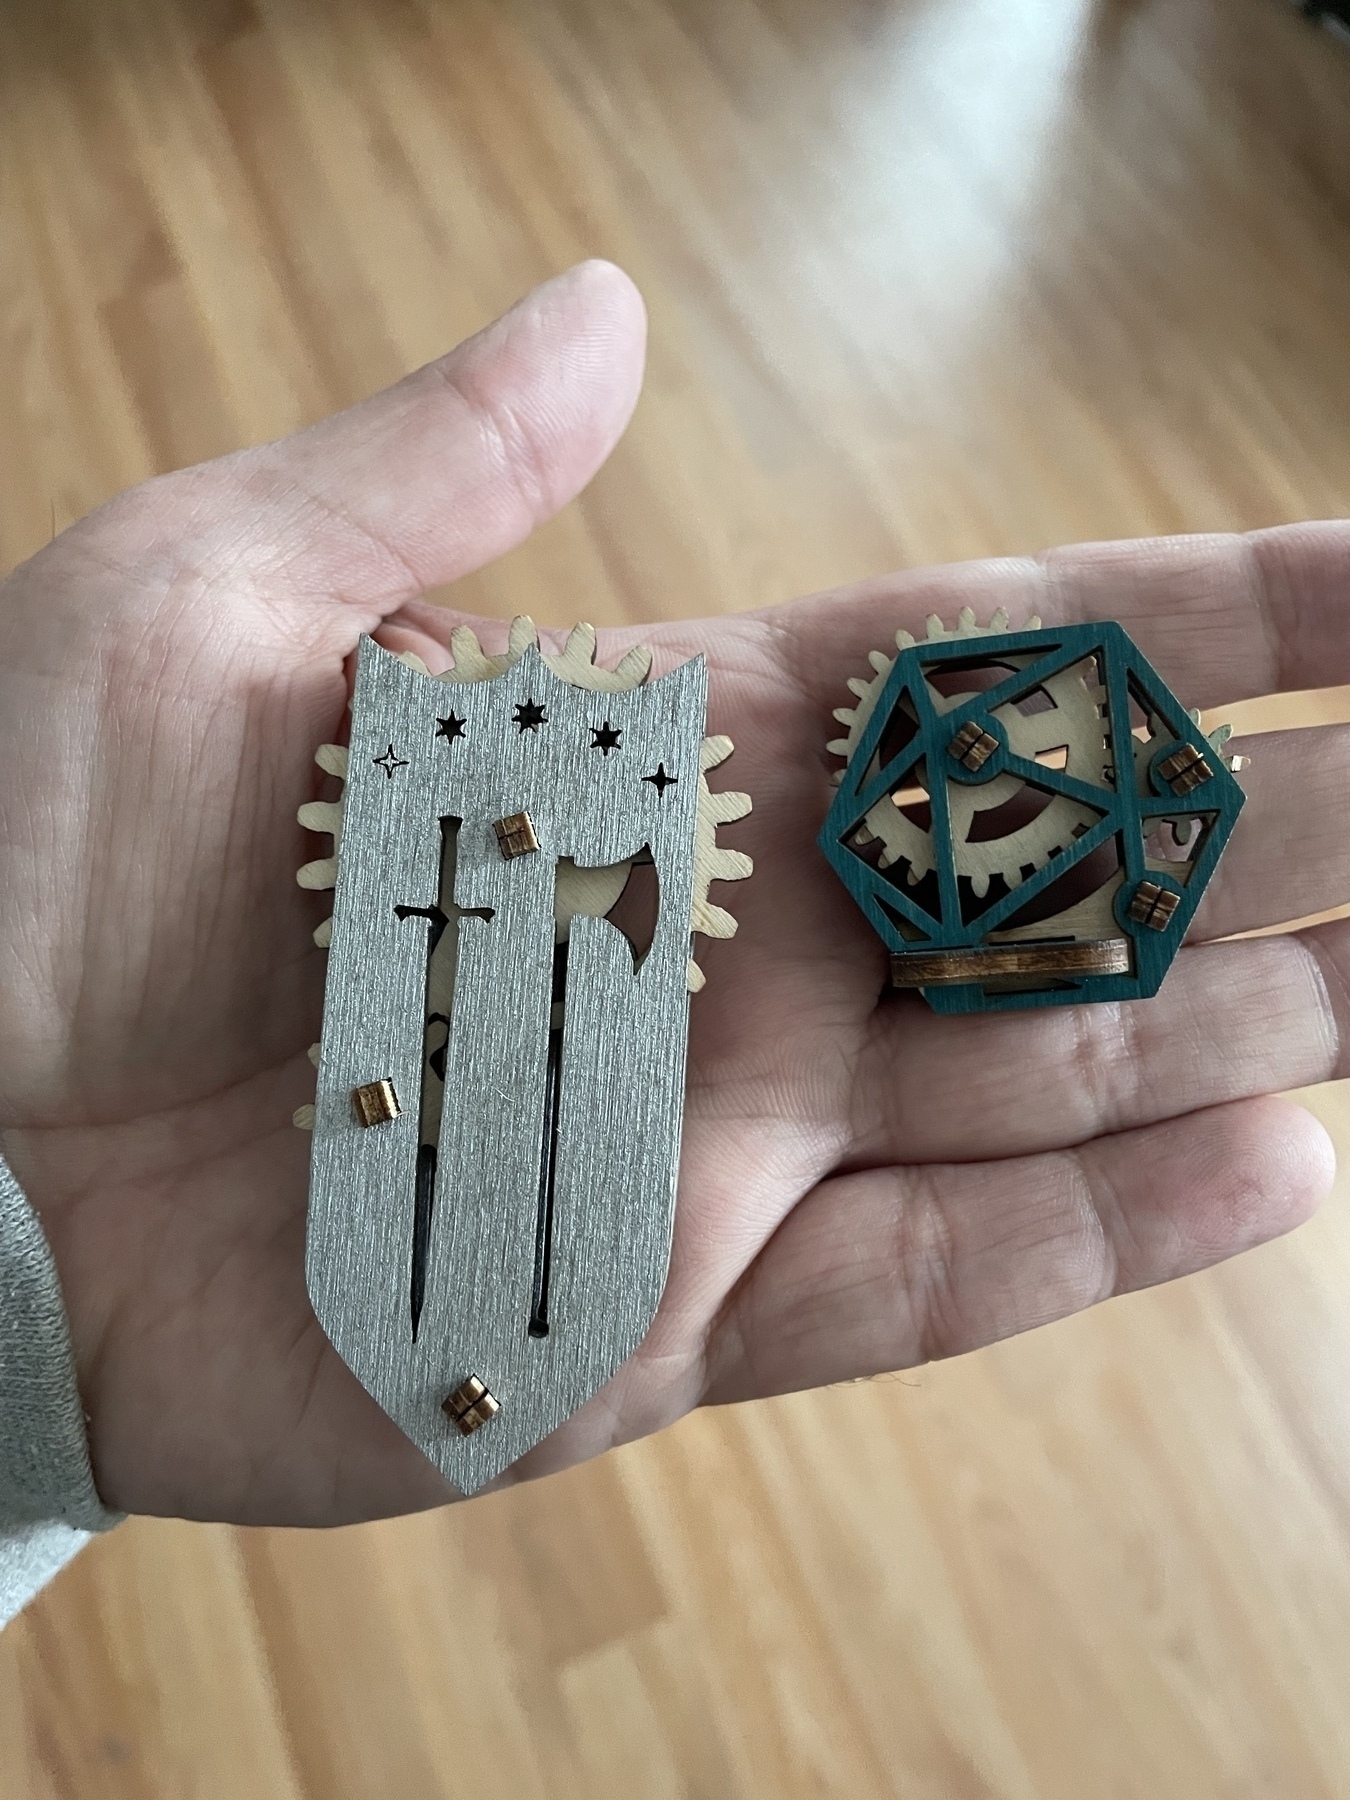 On a palm facing the camera, two flat wooden fidget spinners, one grey in the shape of a shield with axe and sword cutouts, the other a green hexagon with lines implying a die. Each have gears sticking out of edges that can be spun by fingers. 